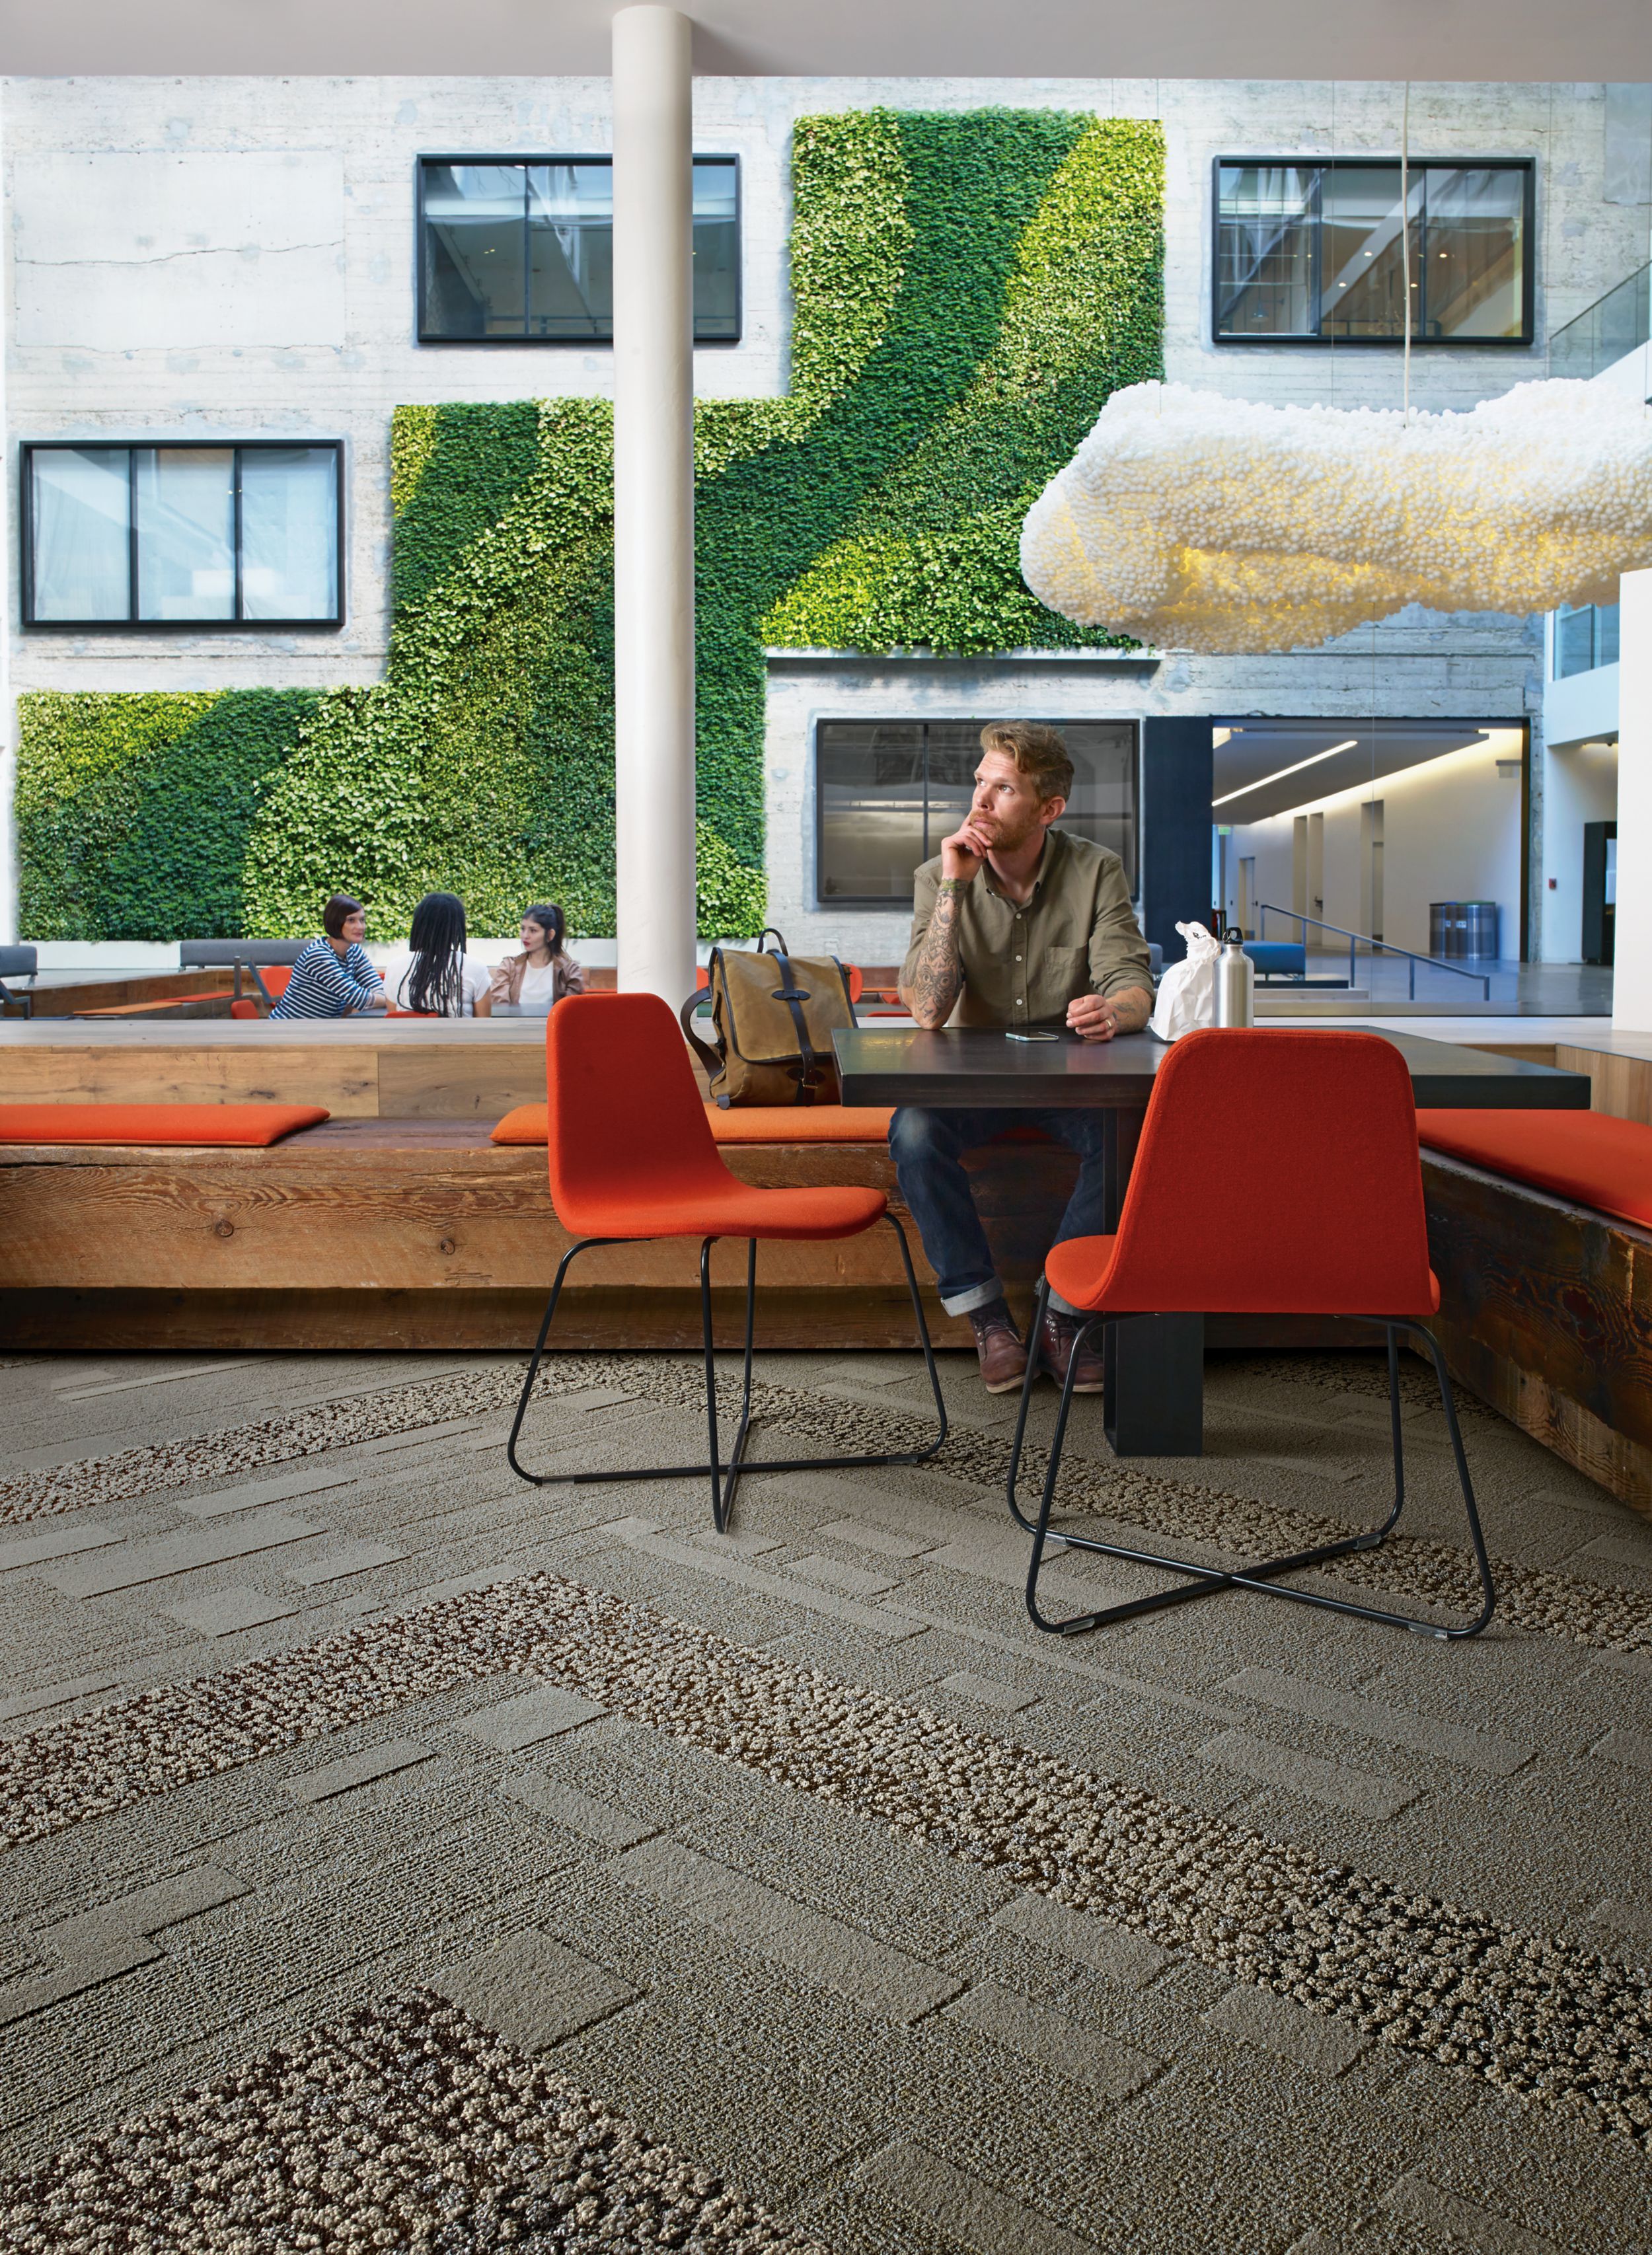 Interface EM552 plank carpet tile with man sitting at table with lunch and group meeting in front of vine wall in the background  numéro d’image 7